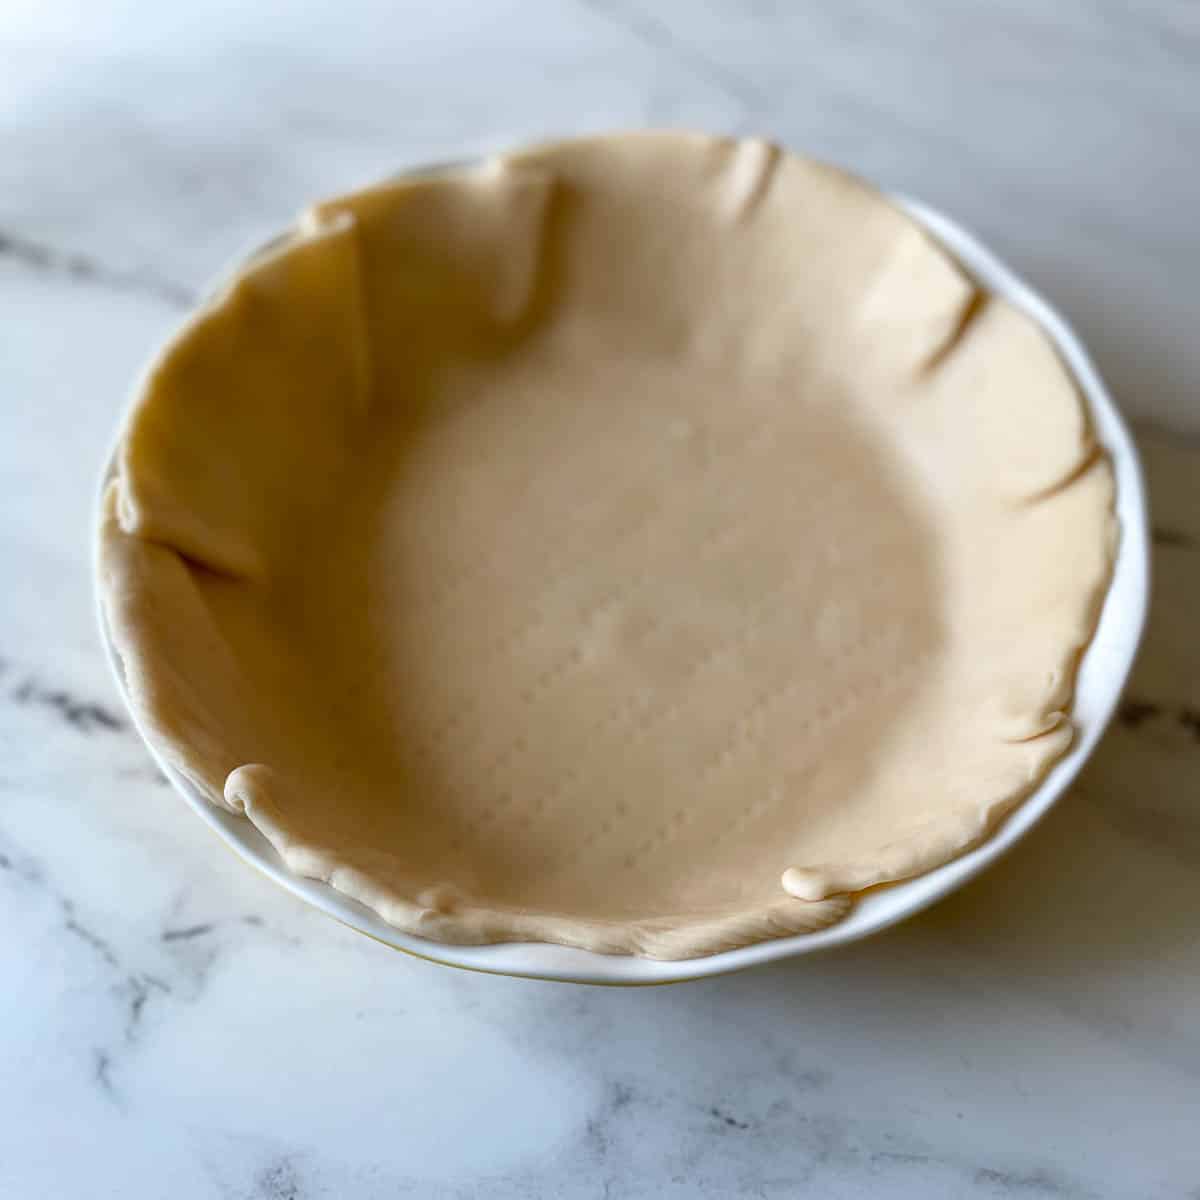 a pie crust with fork many fork indentations is shown in a white pie plate.